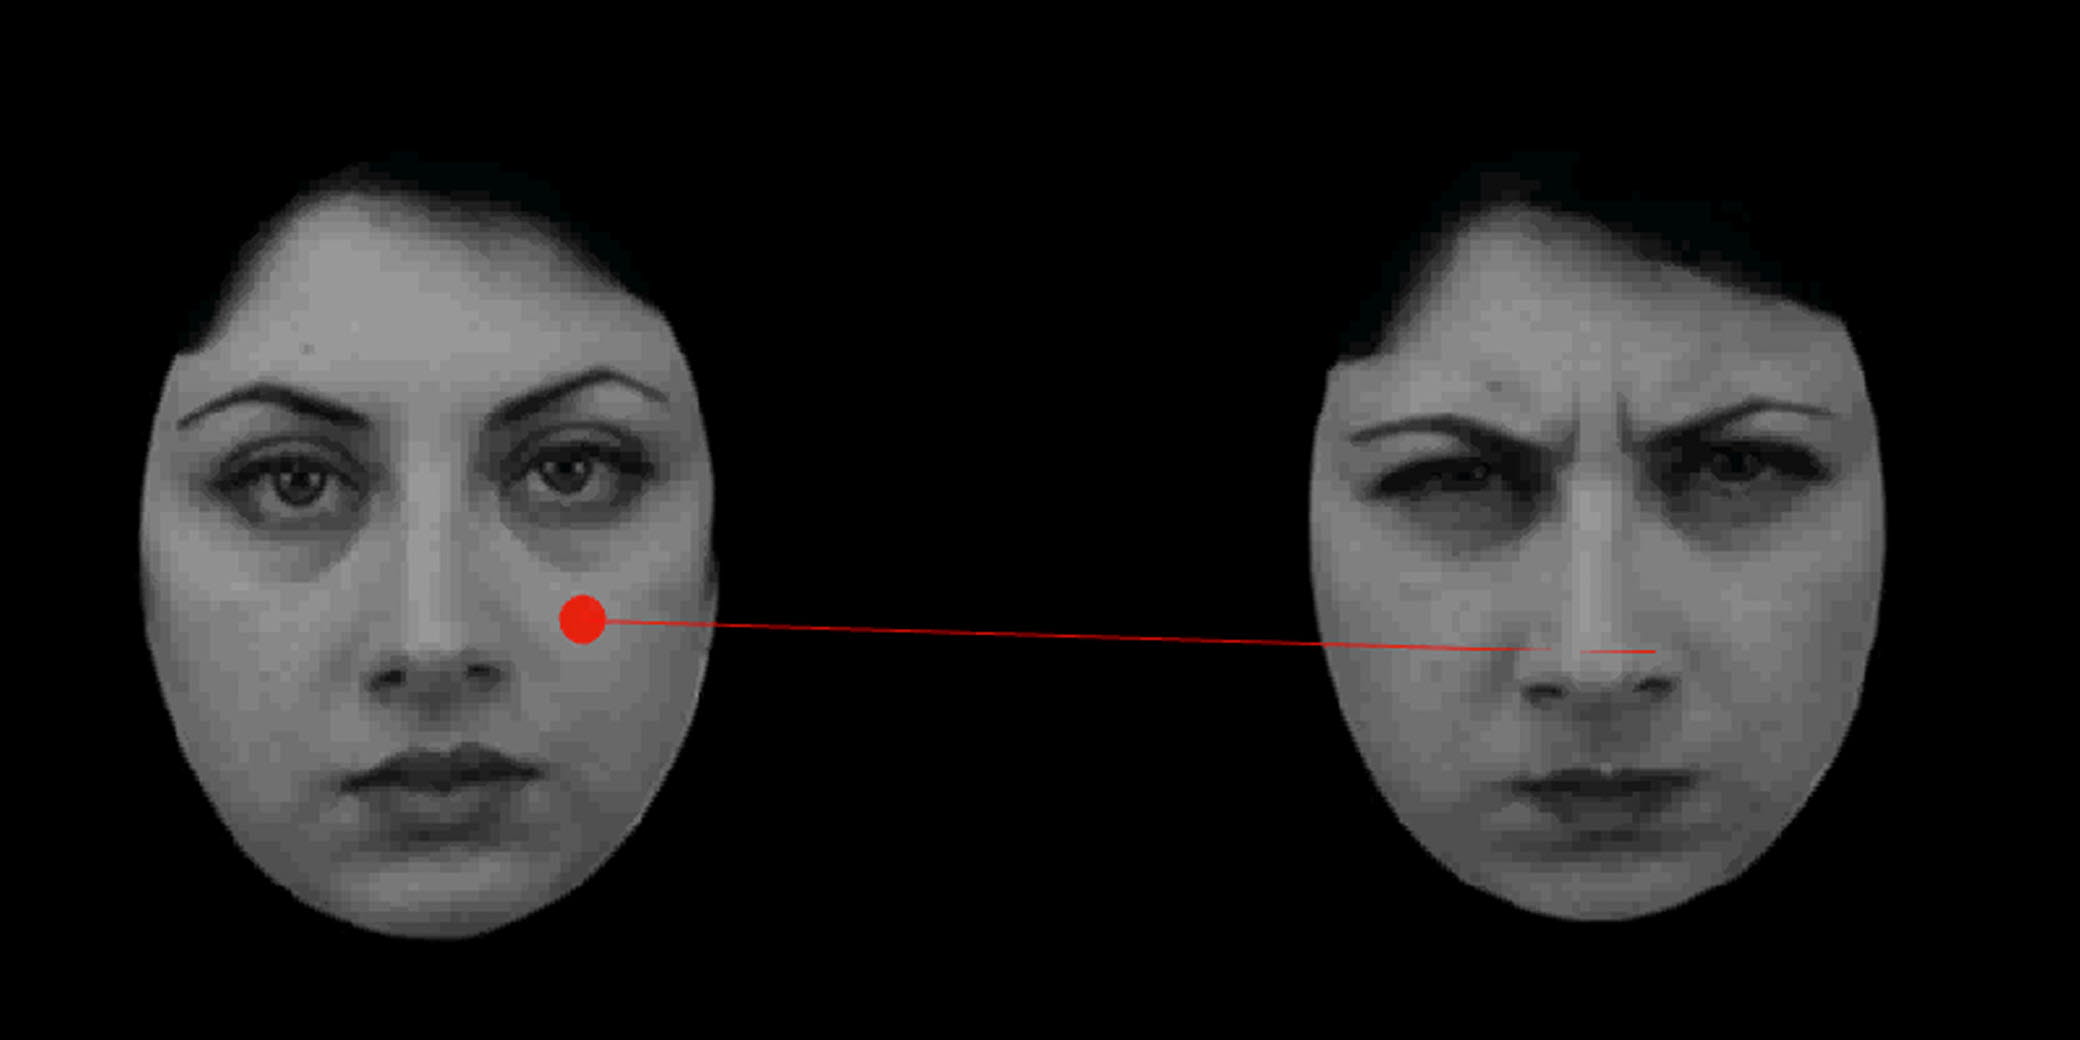 Example of stimuli involving faces, displayed to test subjects